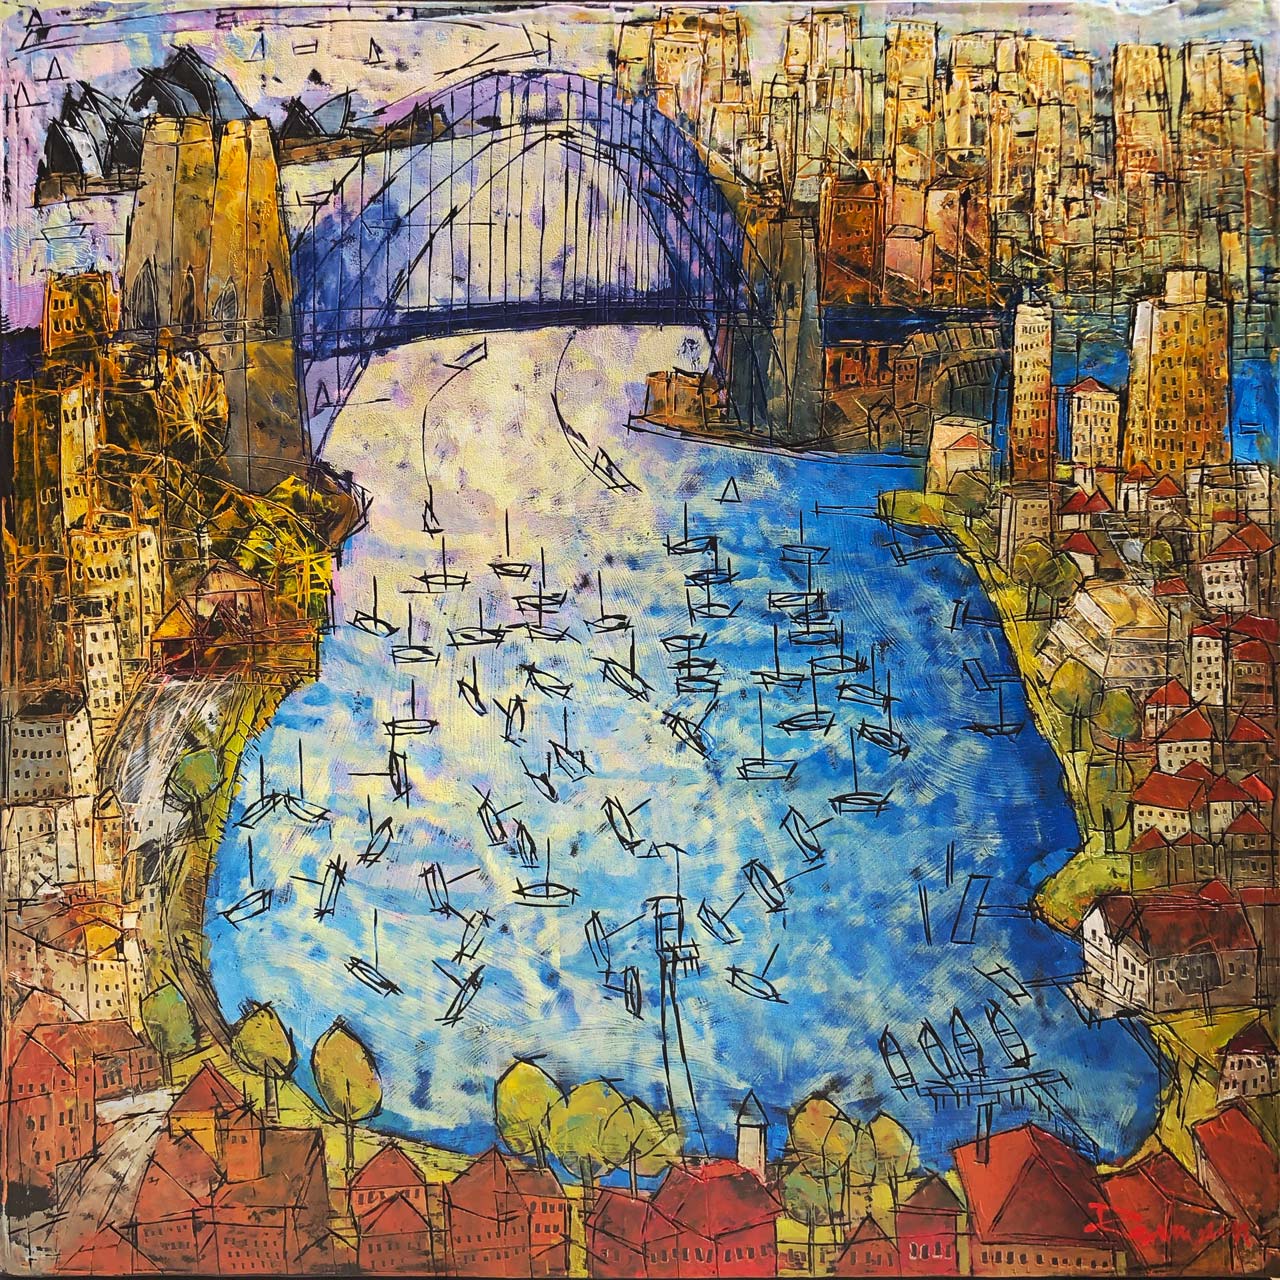 Sydney Oil Painting of Lavender Bay, Sydney Harbour Bridge and Opera House